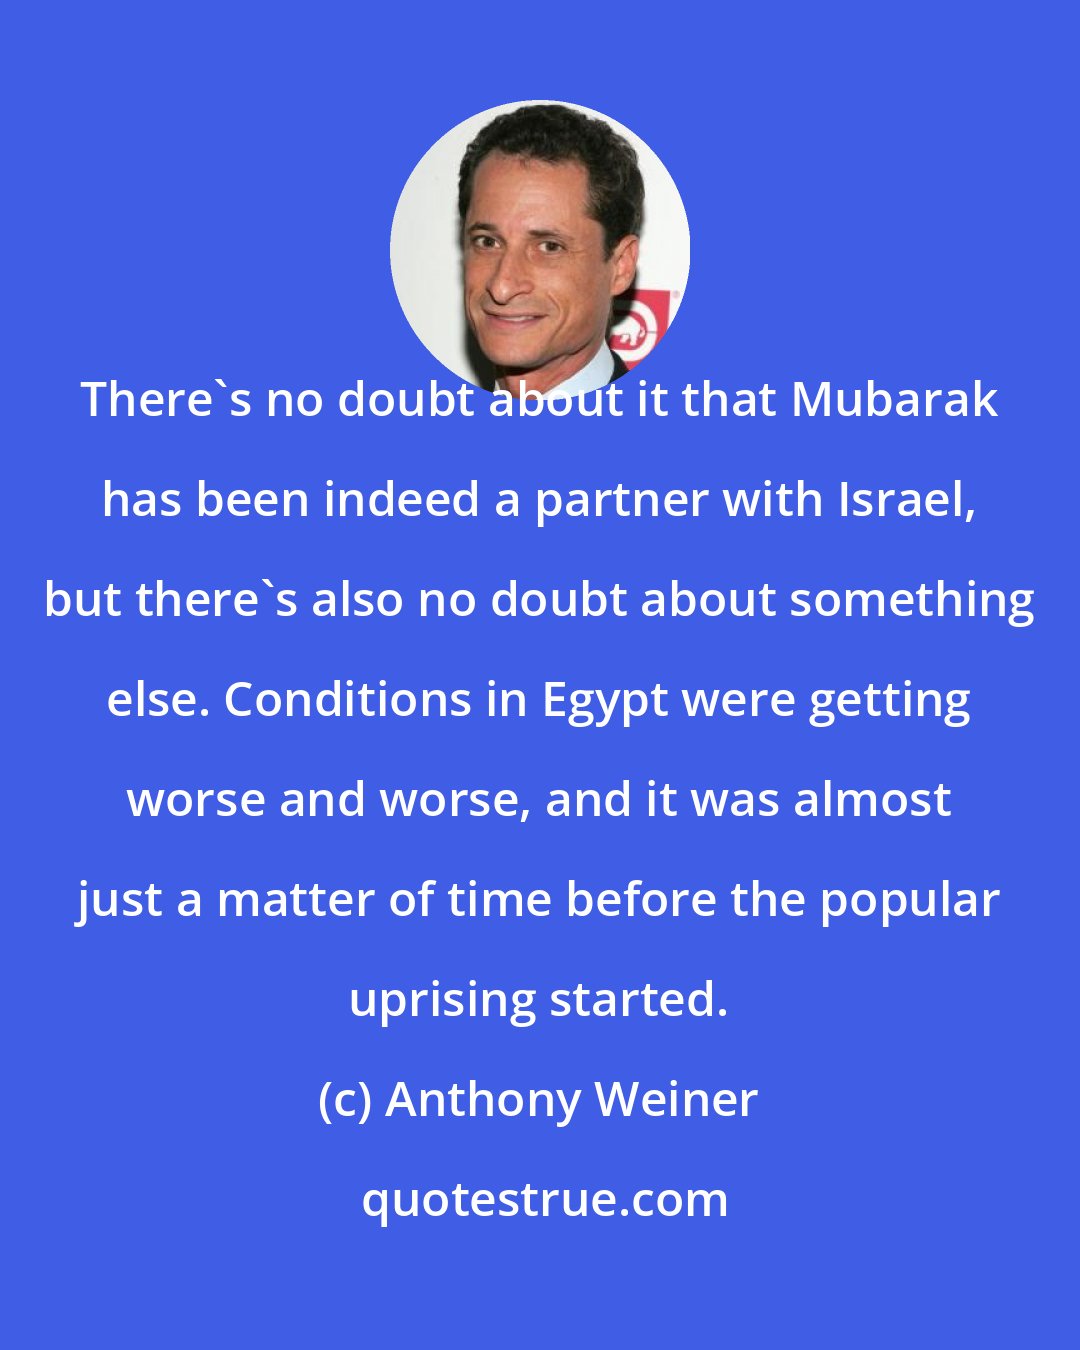 Anthony Weiner: There's no doubt about it that Mubarak has been indeed a partner with Israel, but there's also no doubt about something else. Conditions in Egypt were getting worse and worse, and it was almost just a matter of time before the popular uprising started.